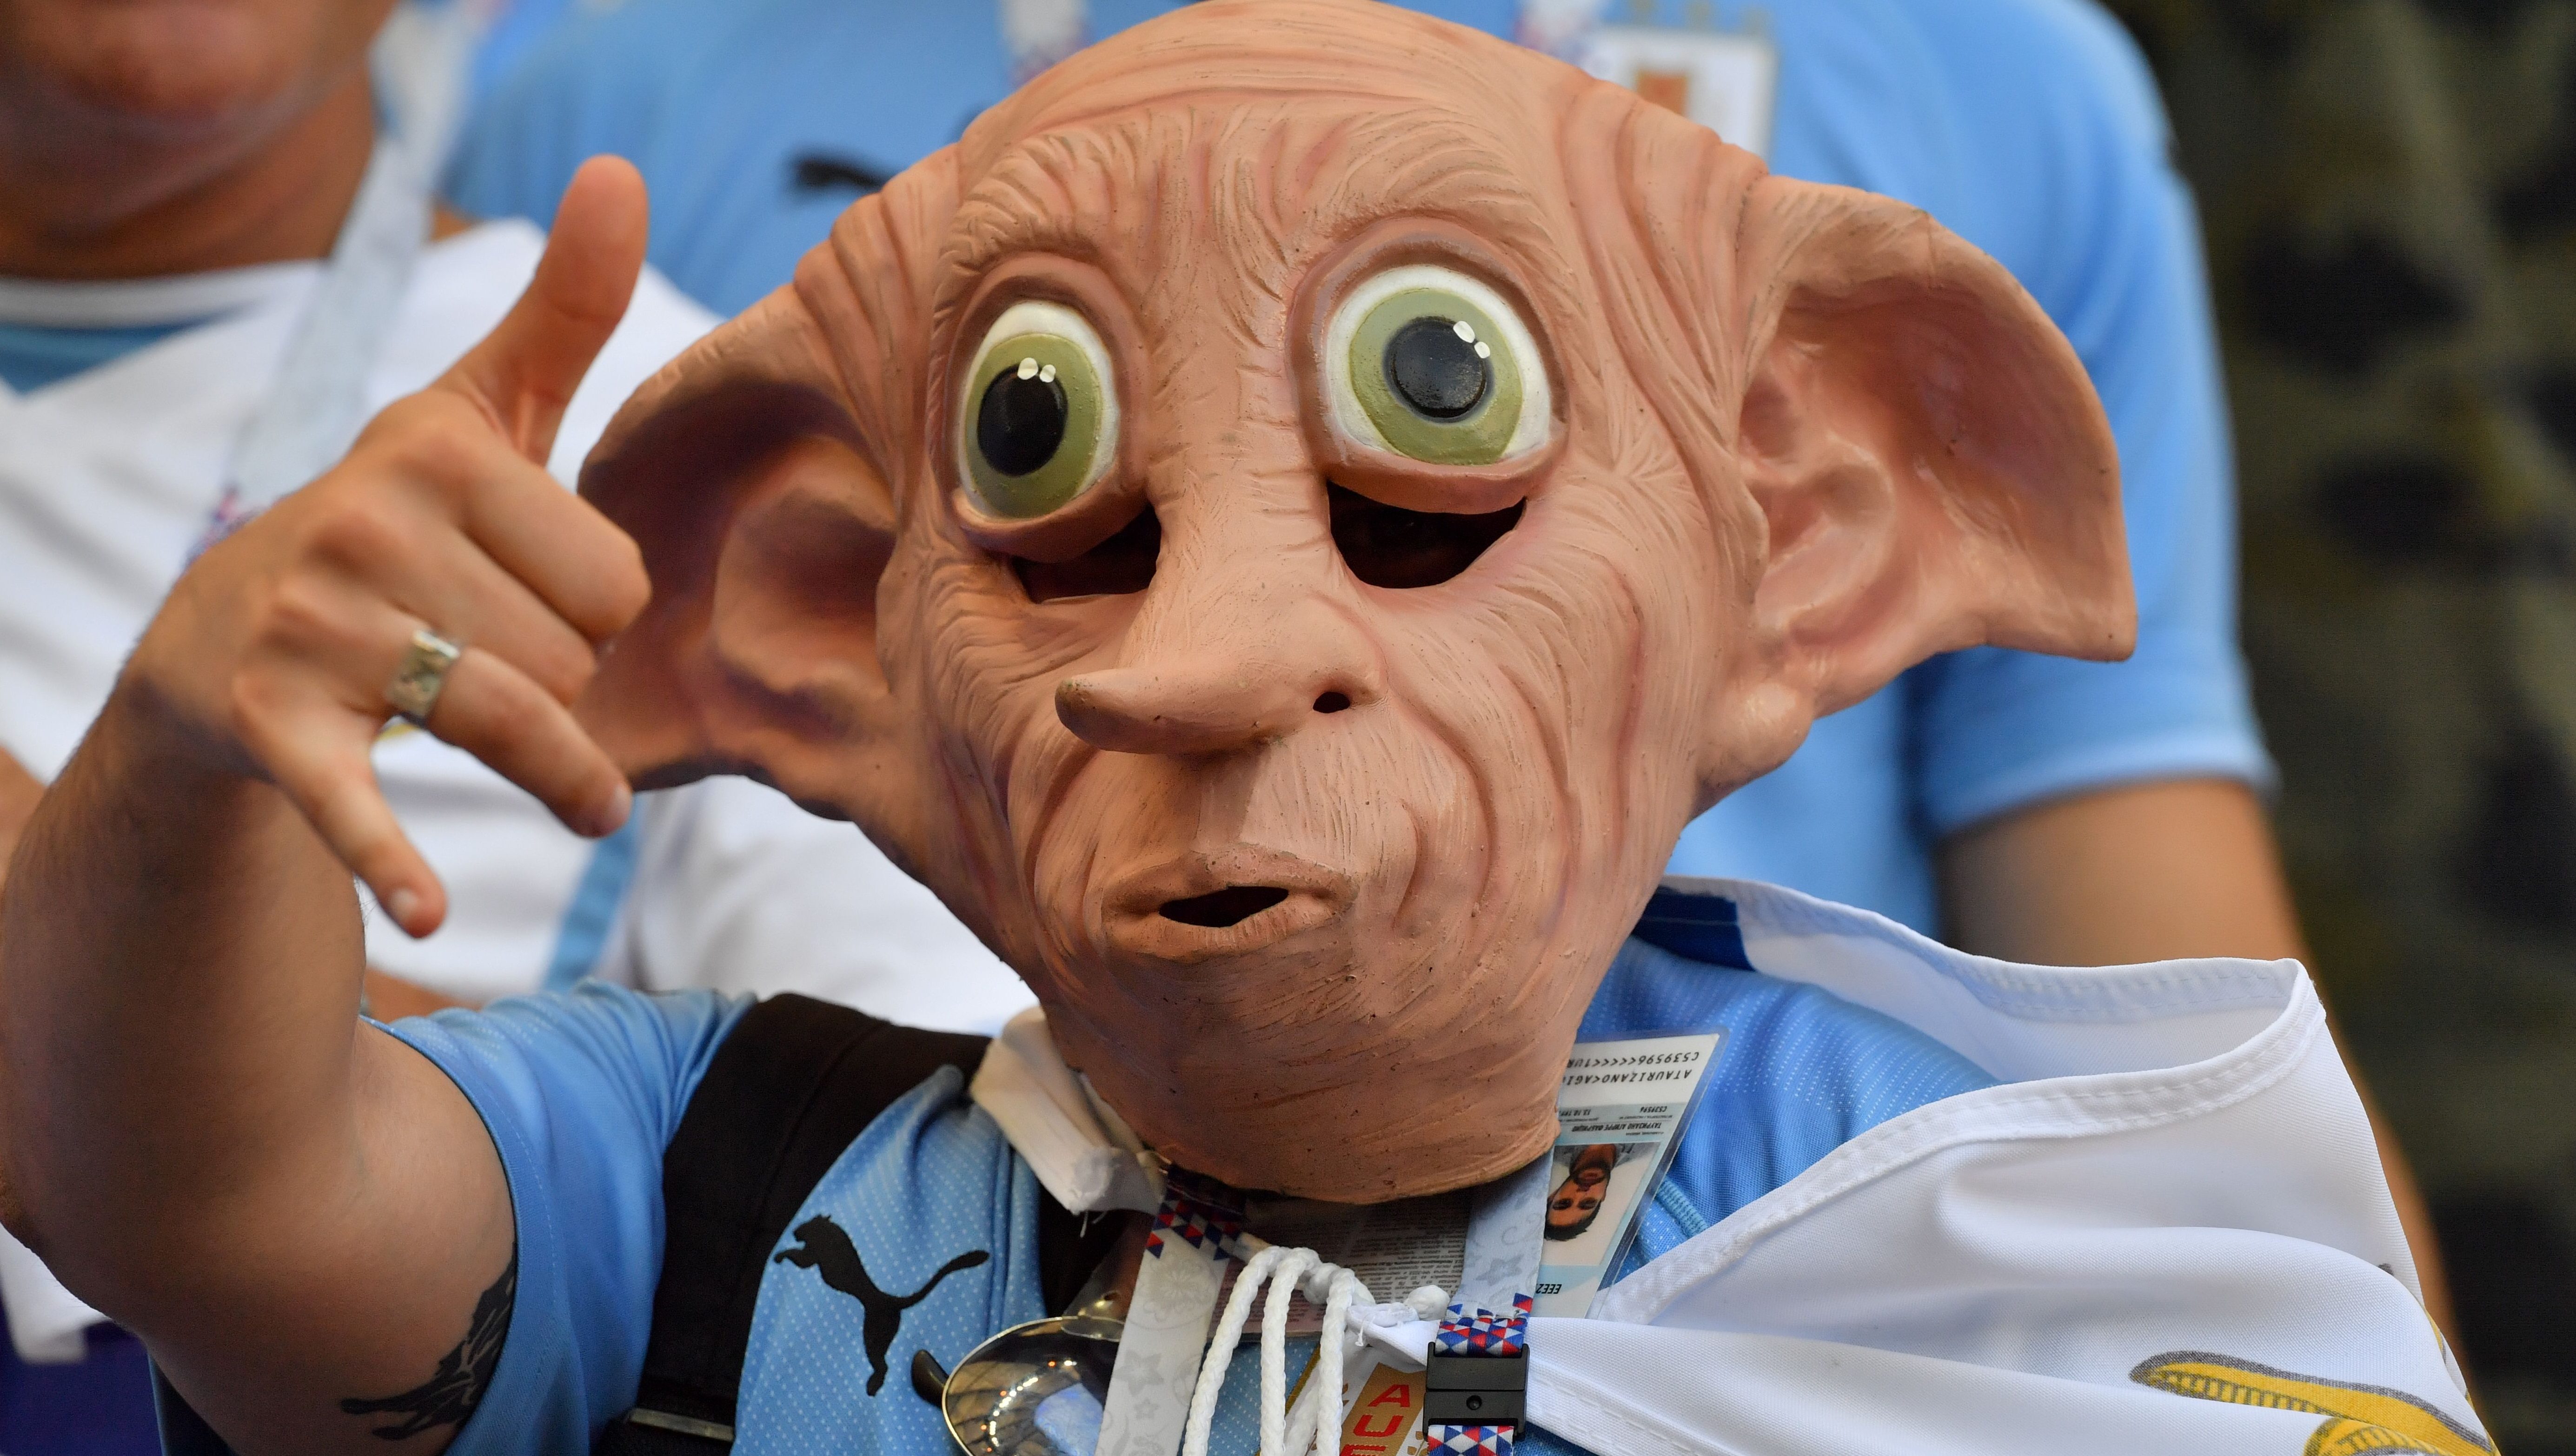 watch-dobby-the-elf-appears-in-creepy-video